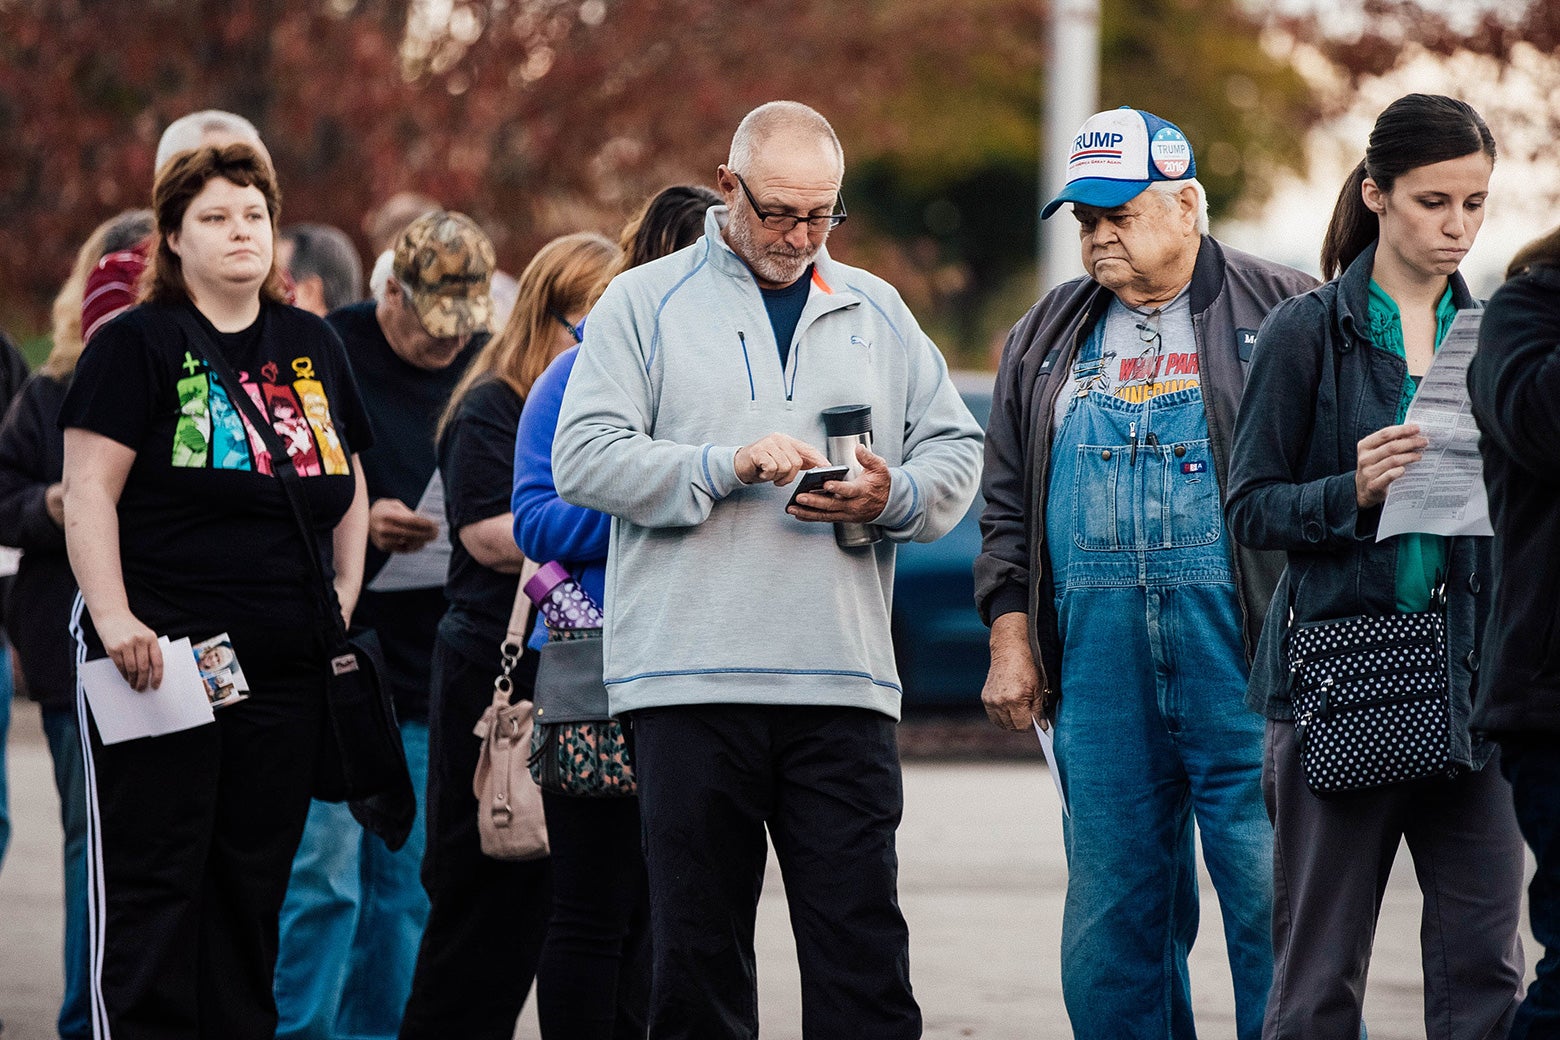 Voters wait in line to cast their ballots on Nov. 8, 2016, in Independence, Missouri.